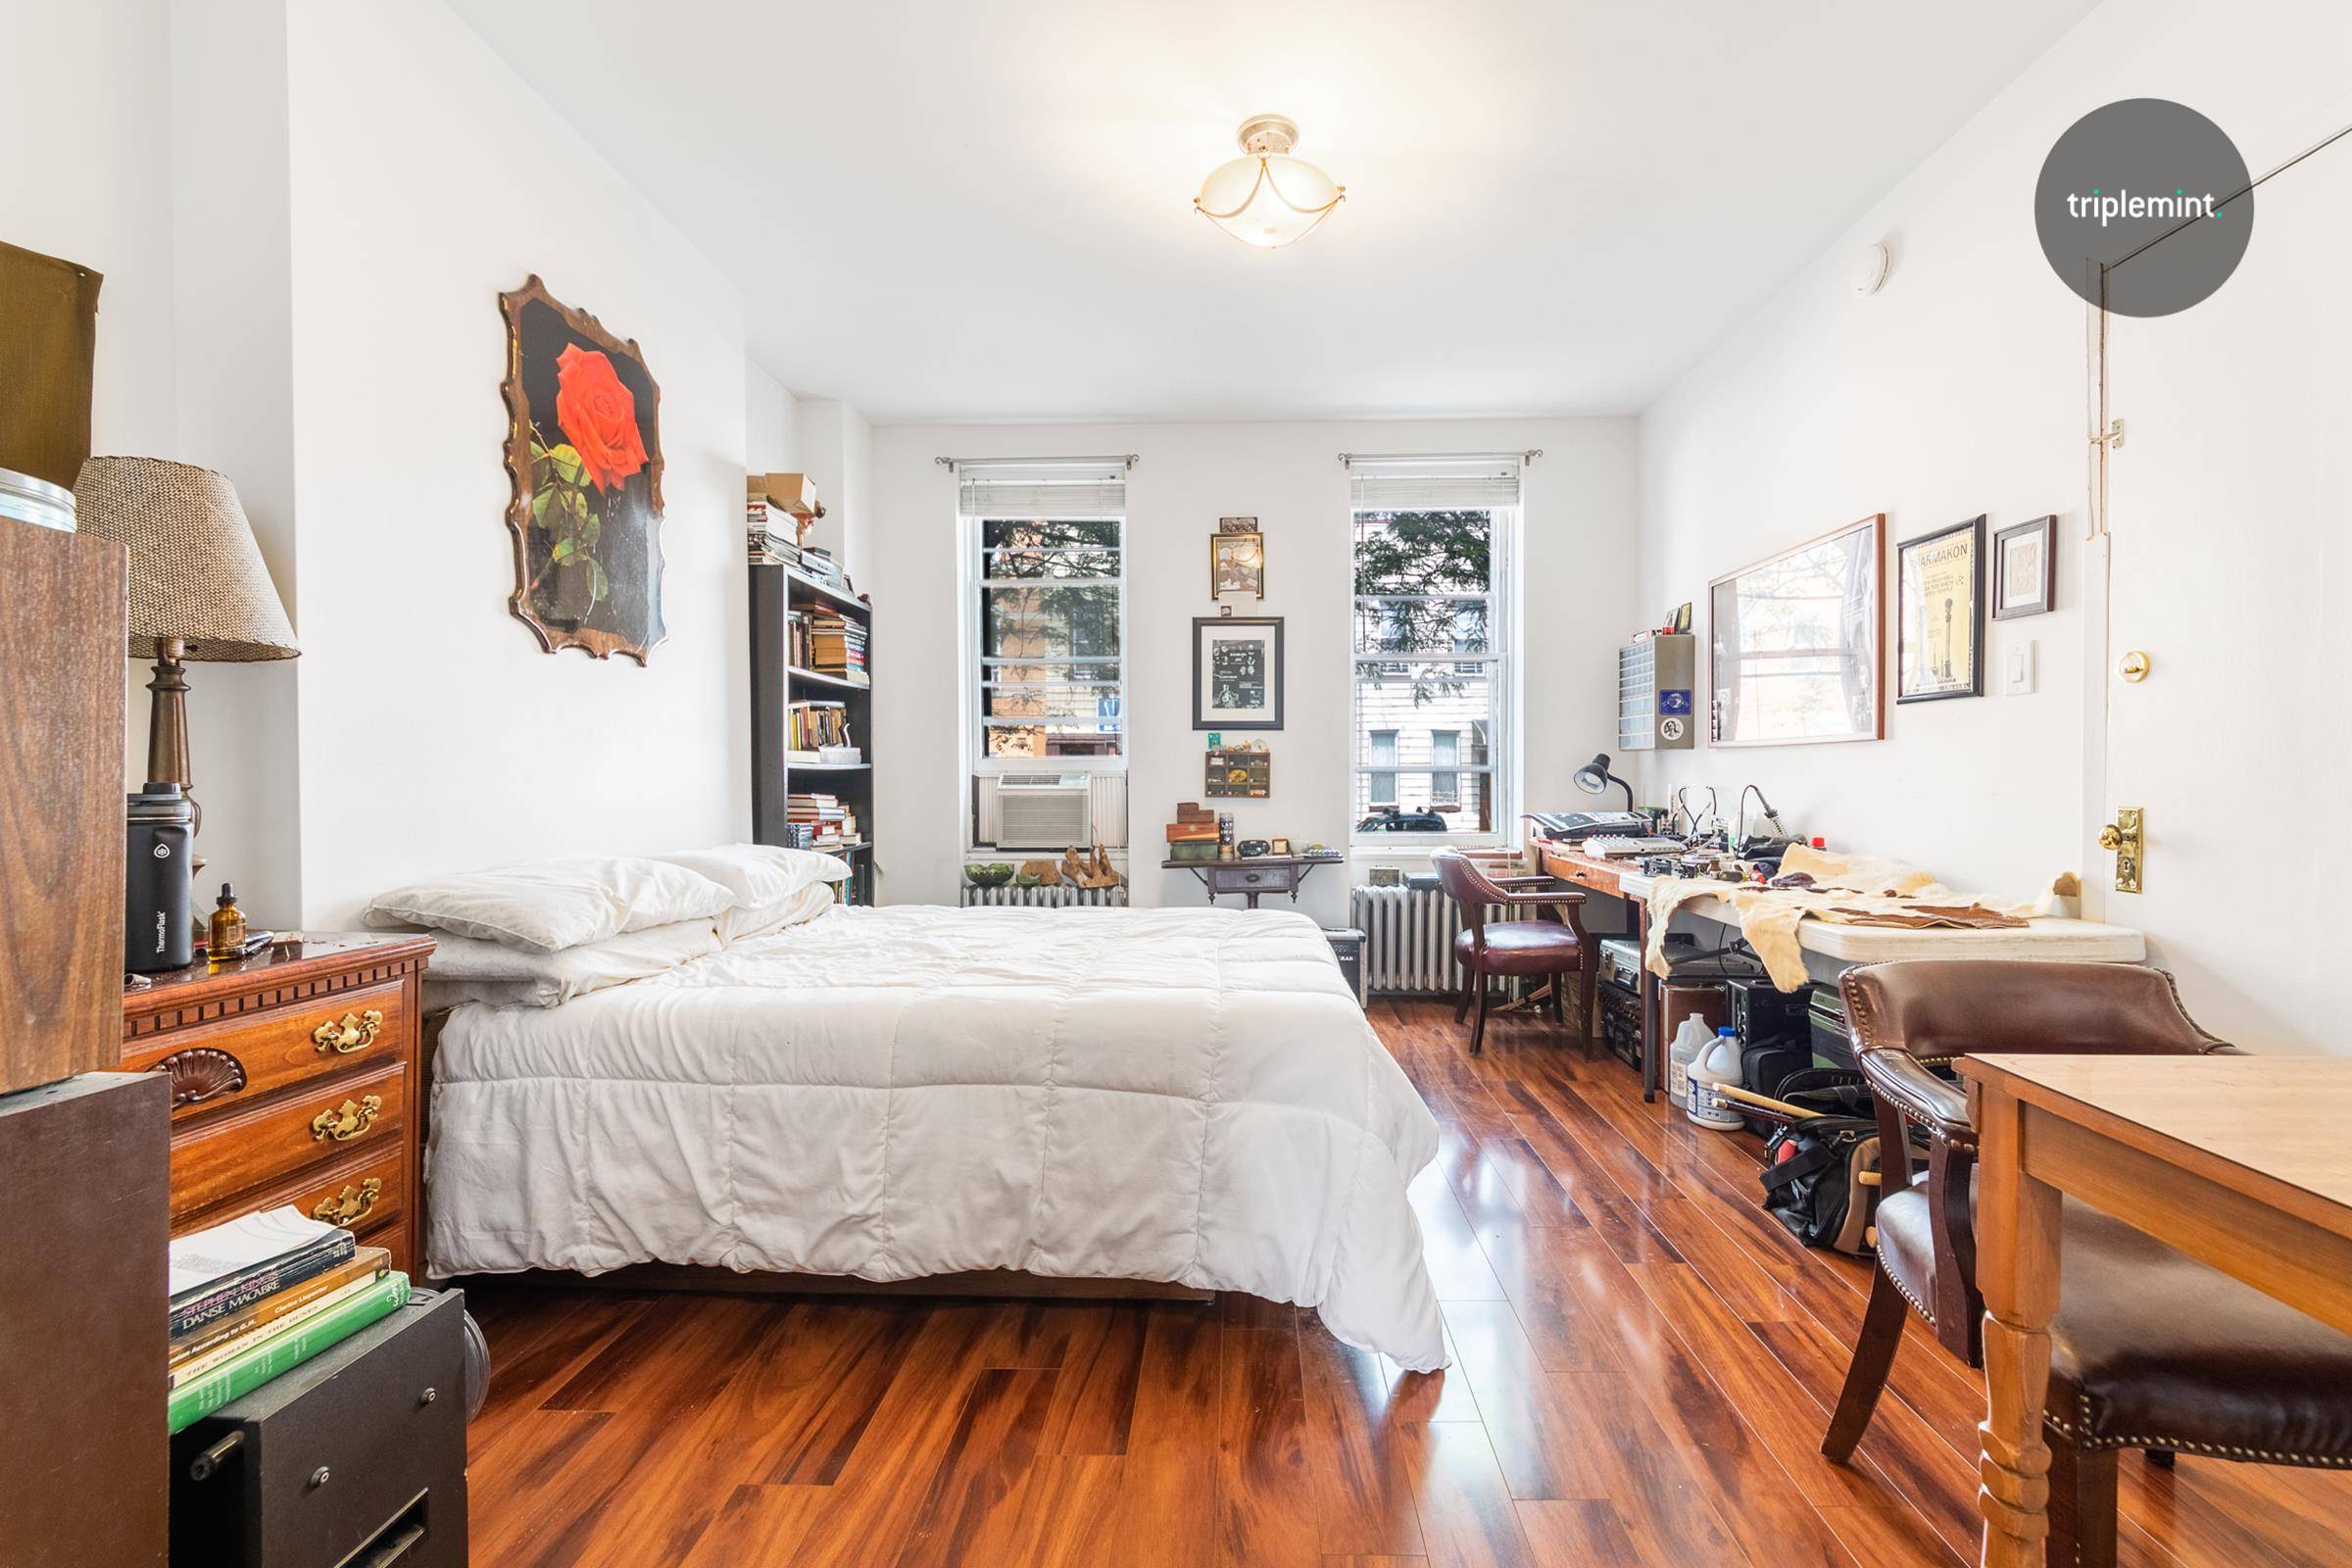 Welcome to 65 16 Forest Ave located in Ridgewood, Queens to this partially renovated three family townhouse, just around the corner from the M subway line.